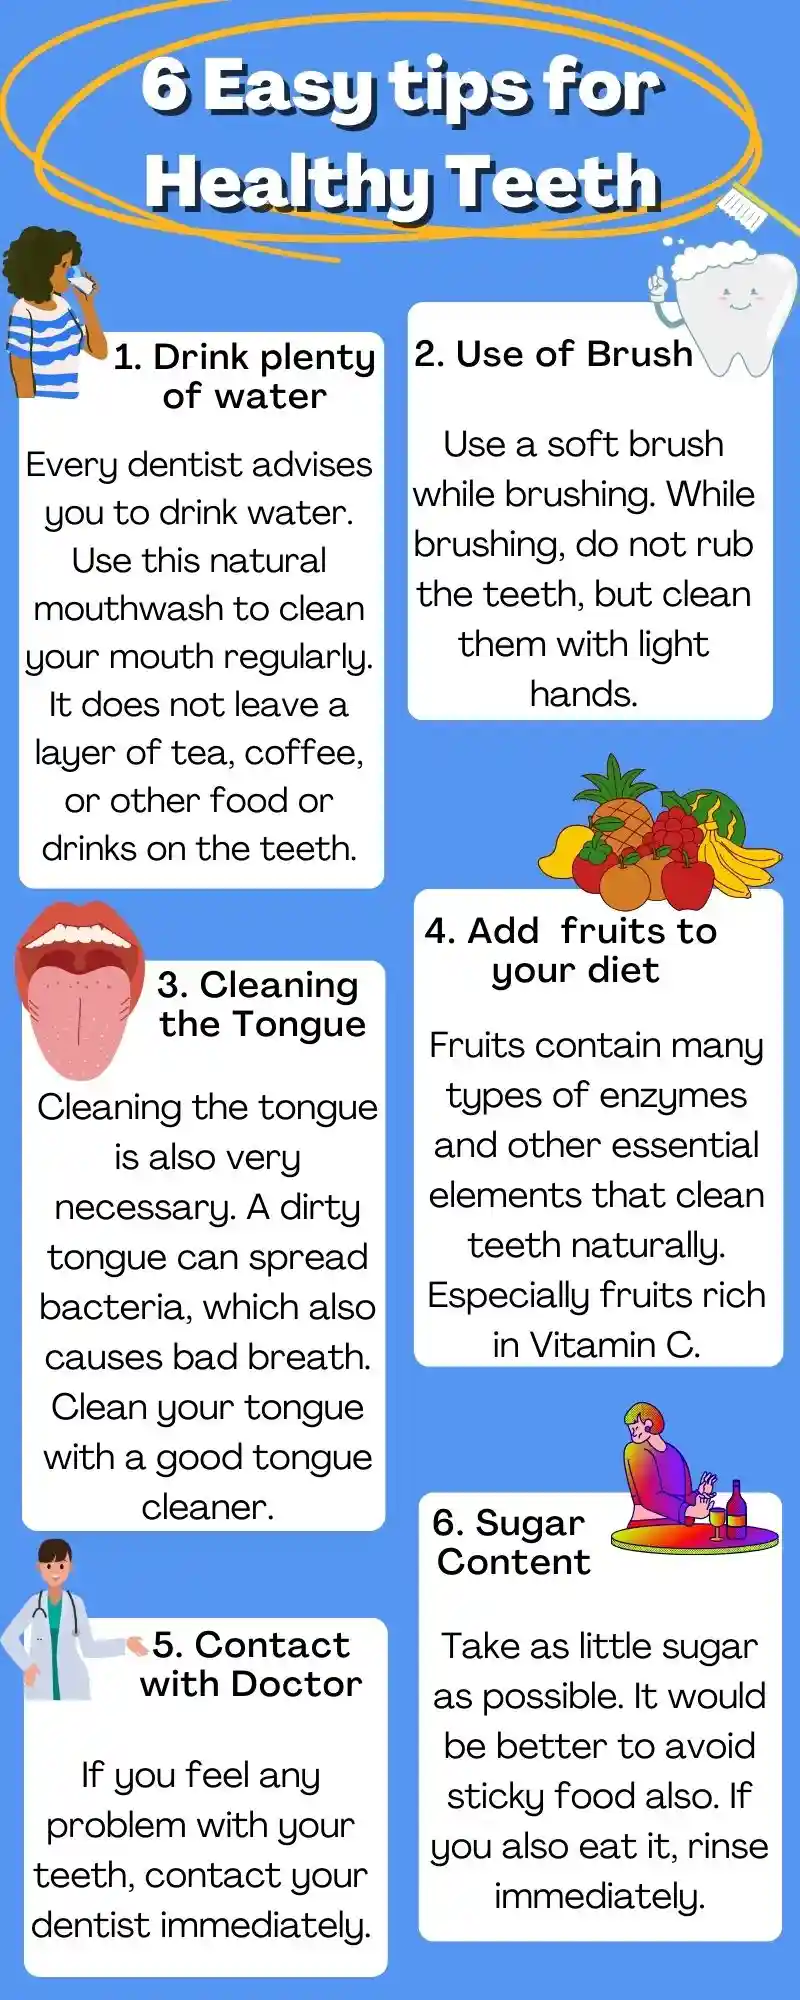 Follow these 6 Easy Tips for Healthy Teeth